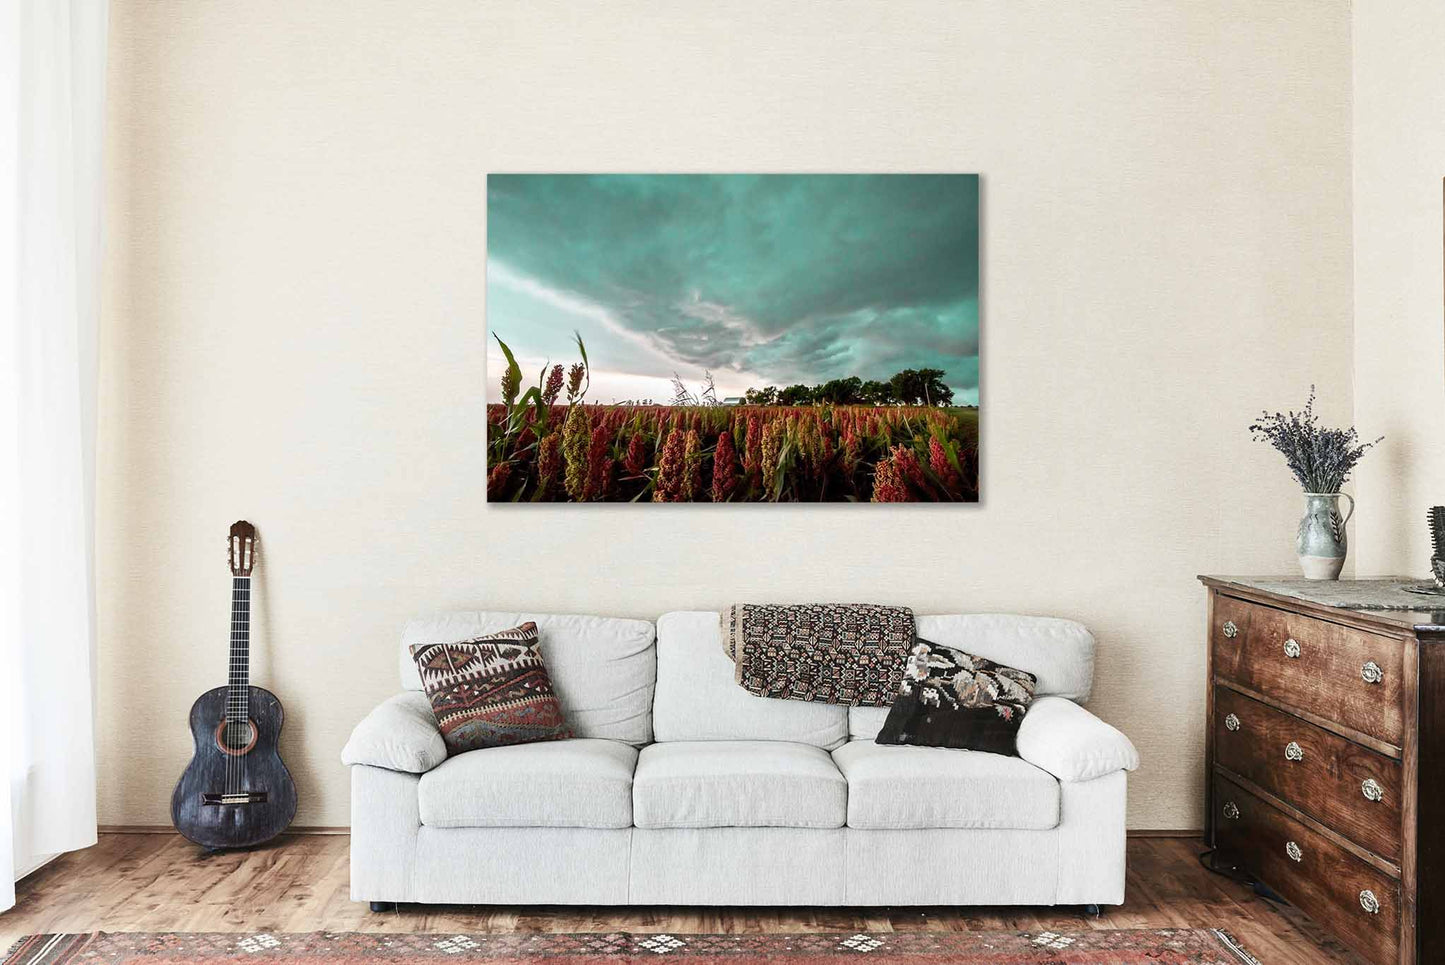 Farm Metal Print - Picture of Colorful Maize Field Under Stormy Sky on Summer Day in Oklahoma Country Wall Art Farmhouse Decor